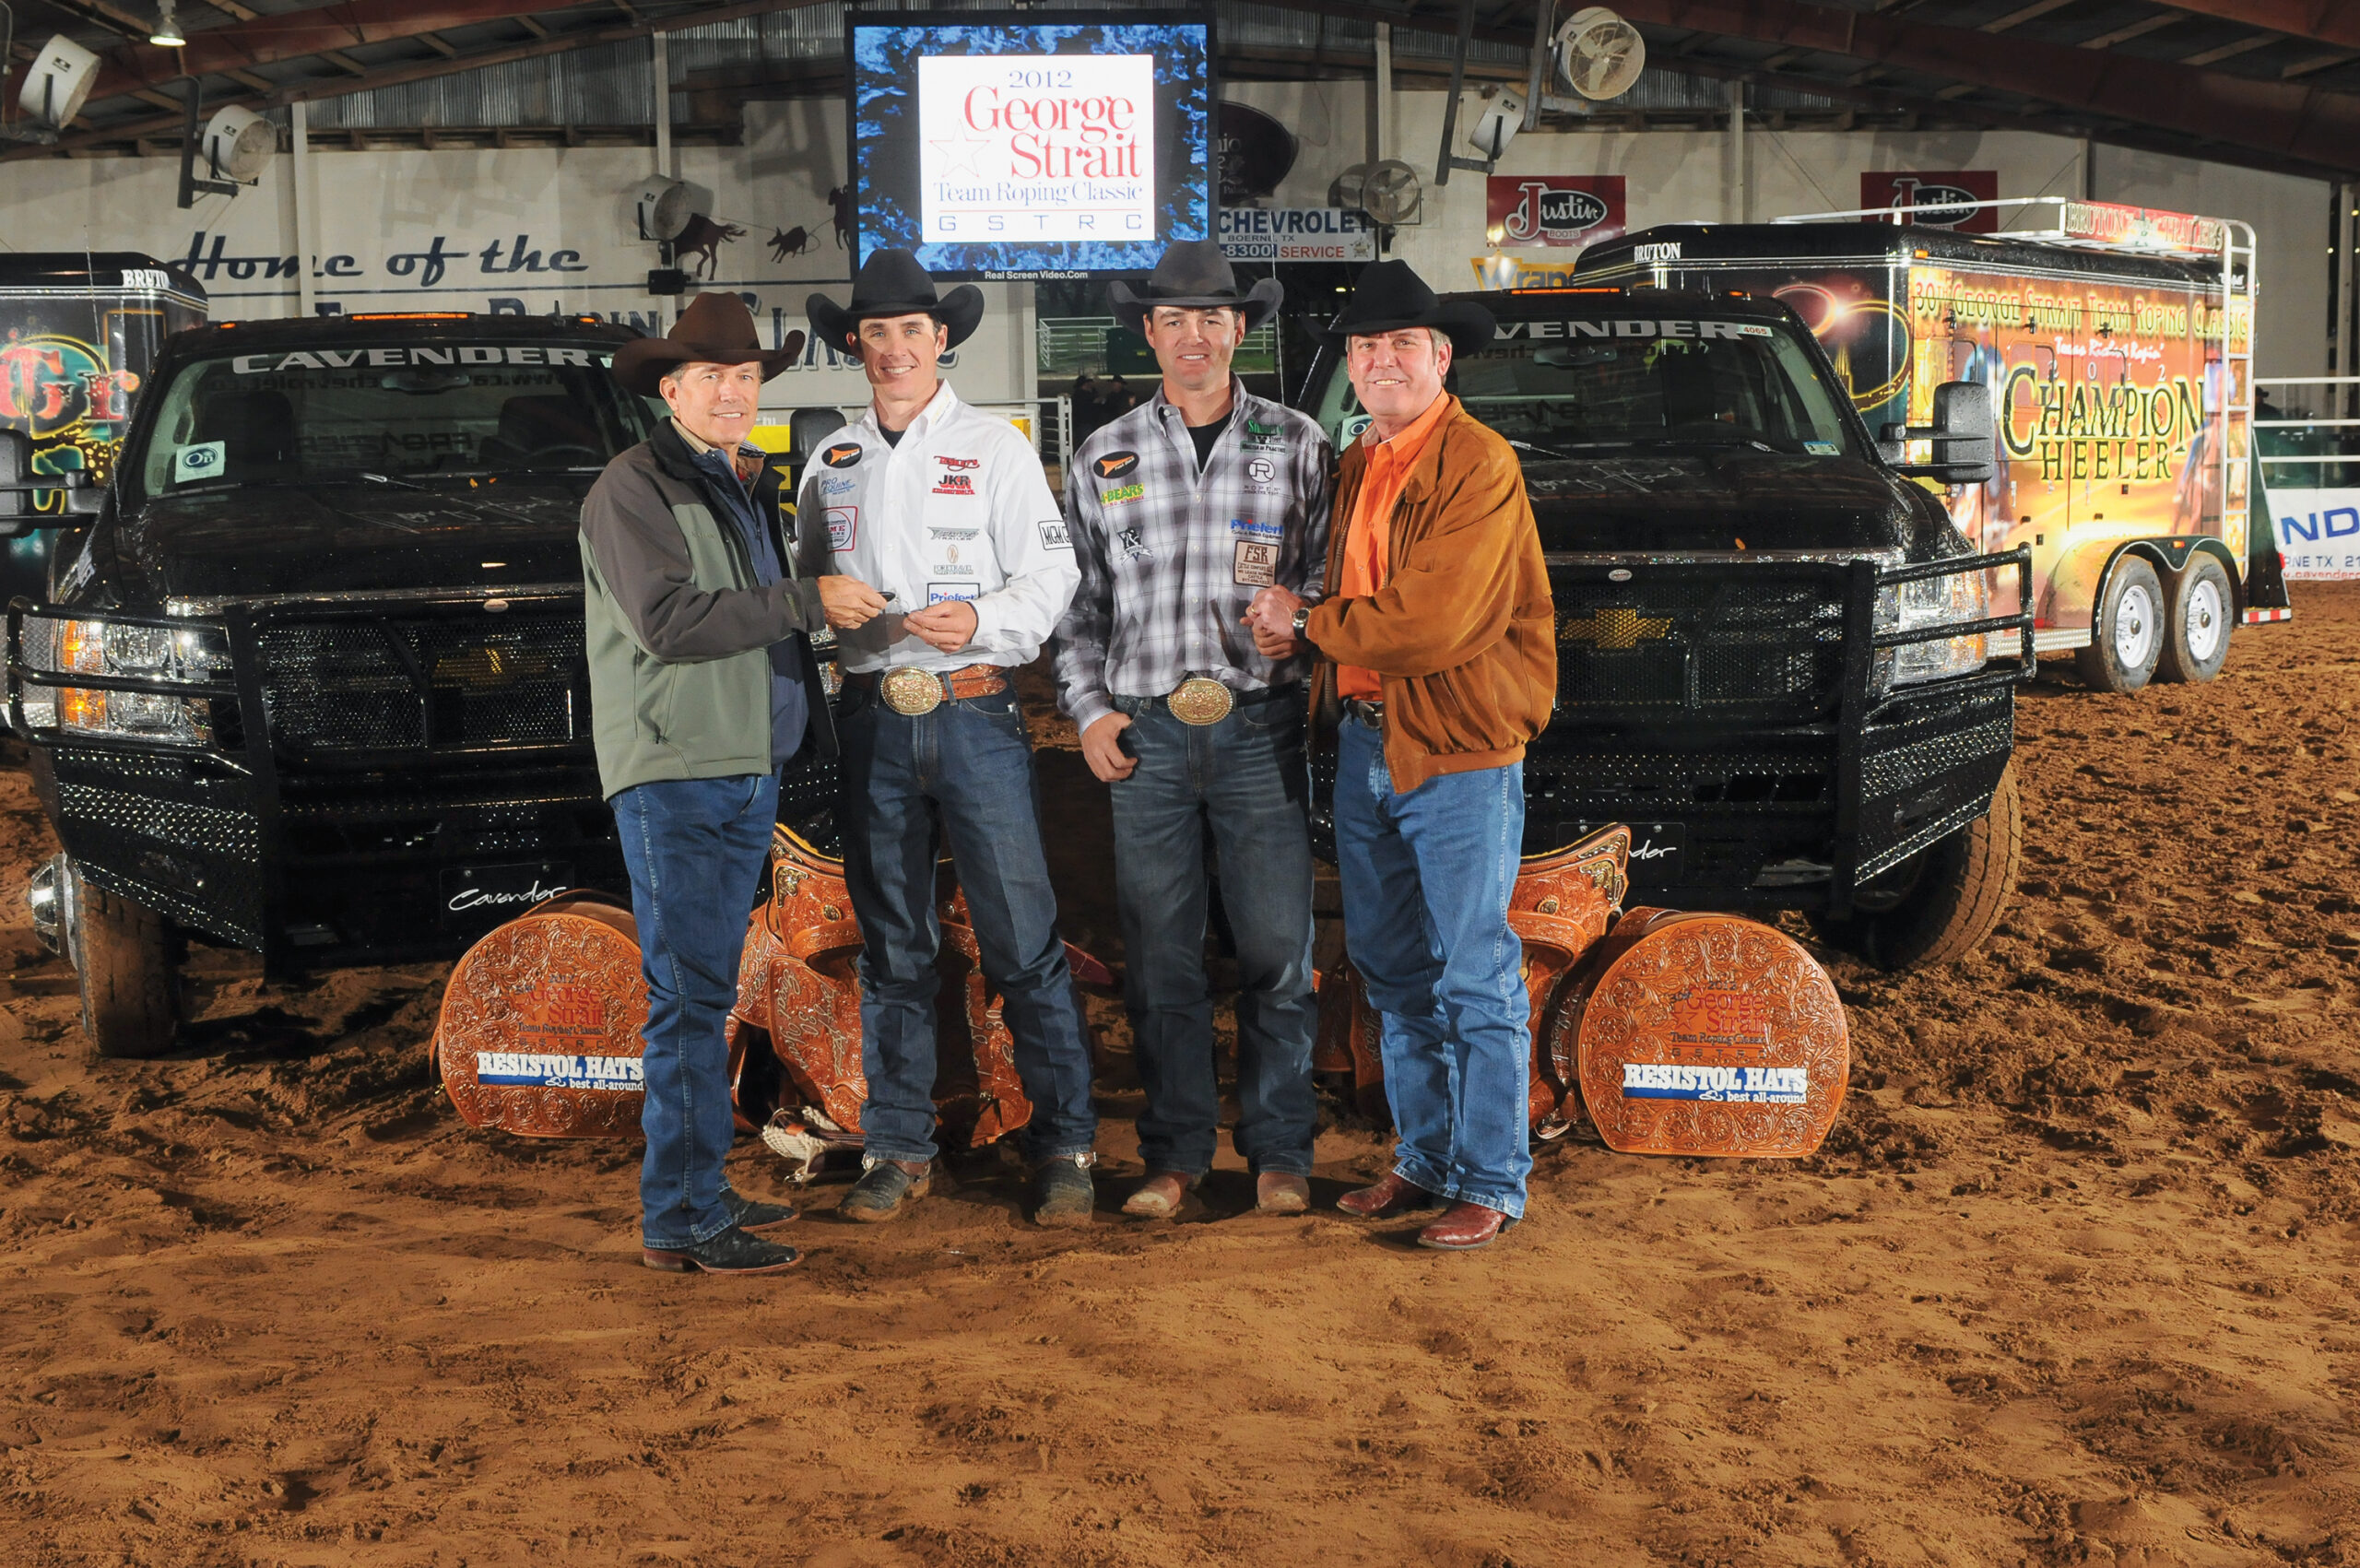 George Strait and Stewart Cavendar with 2012 George Strait Team Roping Classic winners Clay Tryan and Patrick Smith. 